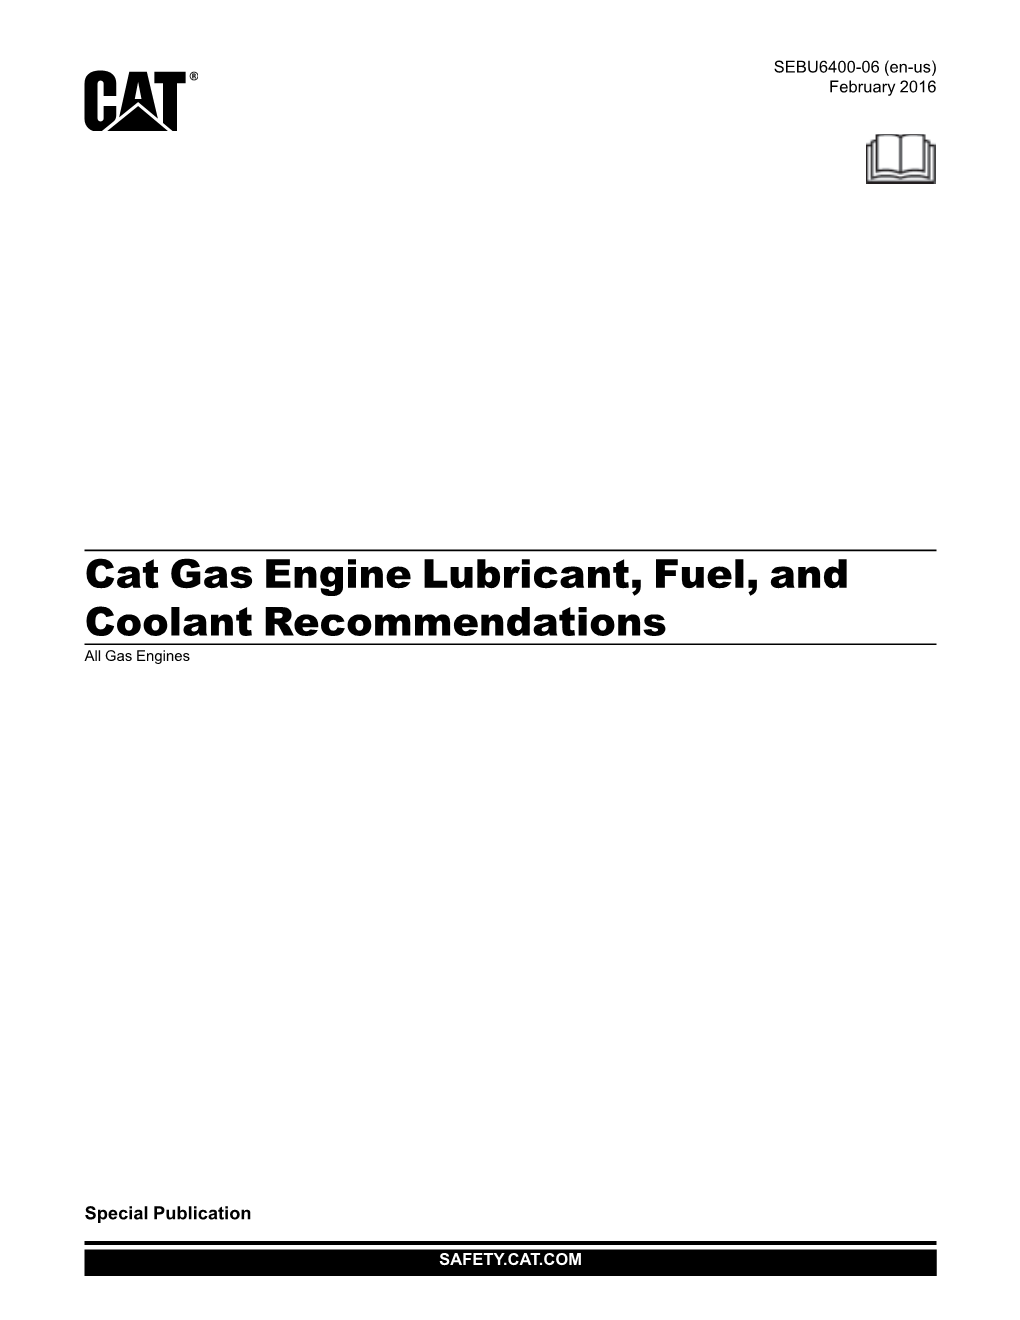 Cat Gas Engine Lubricant, Fuel, and Coolant Recommendations All Gas Engines